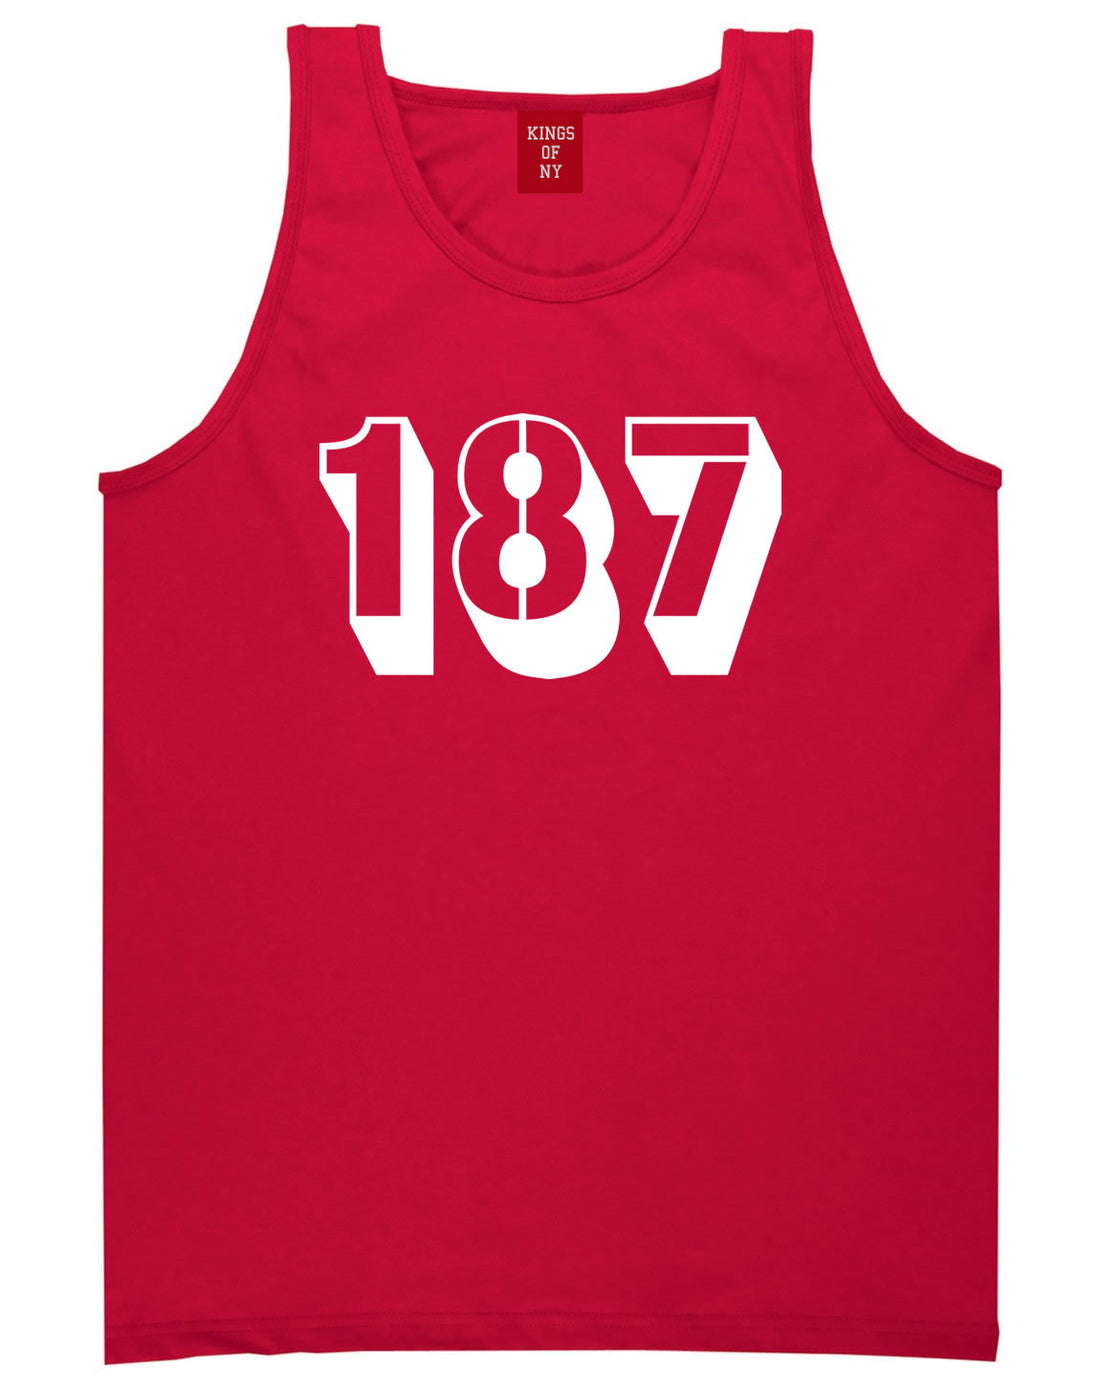 187 Tank Top in Red by Kings Of NY